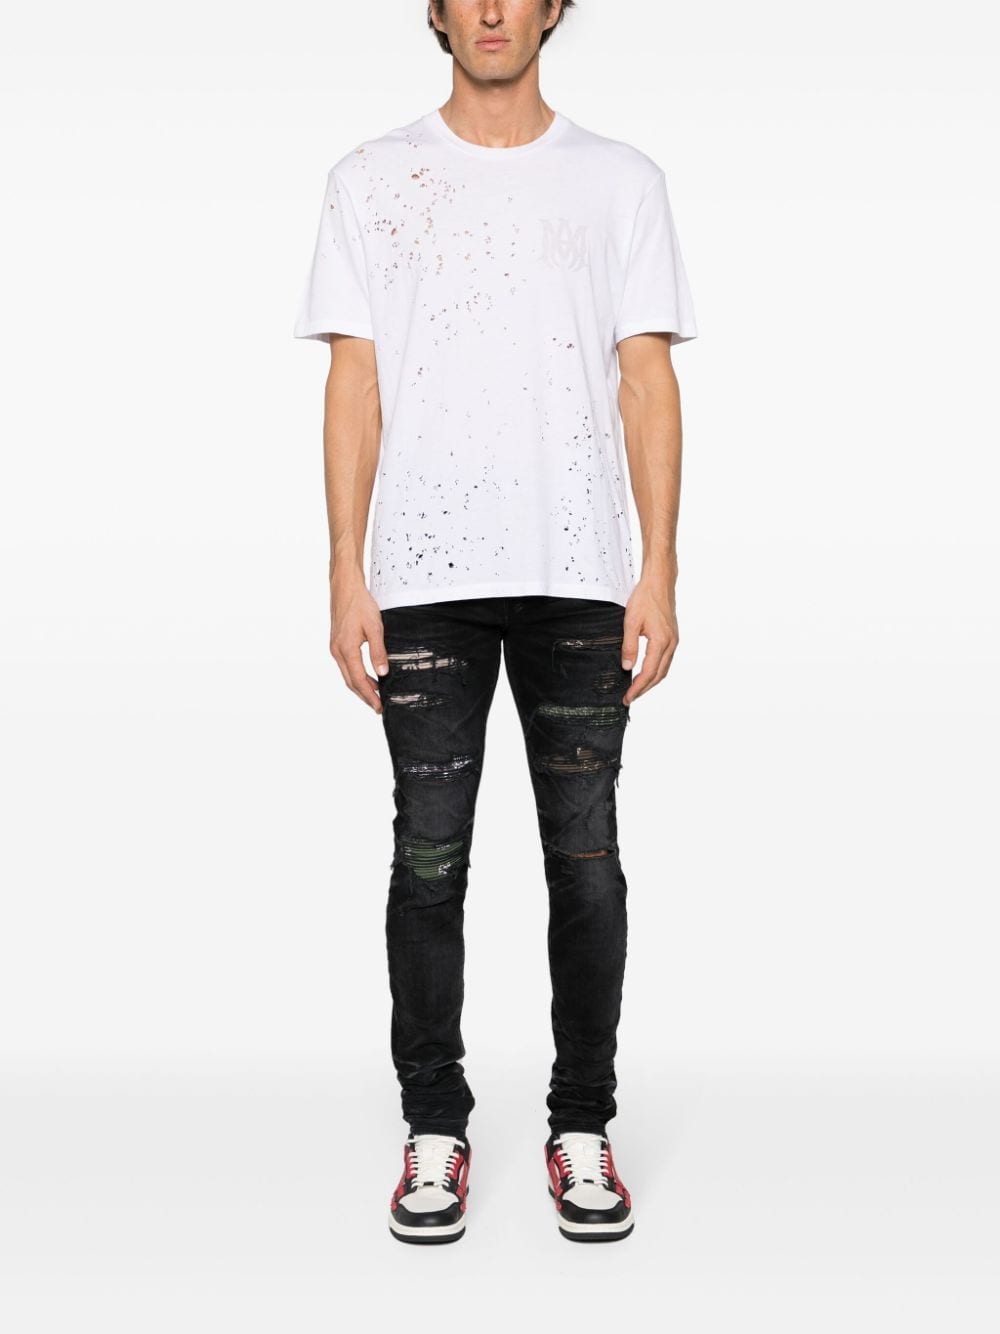 Distressed effect t-shirt